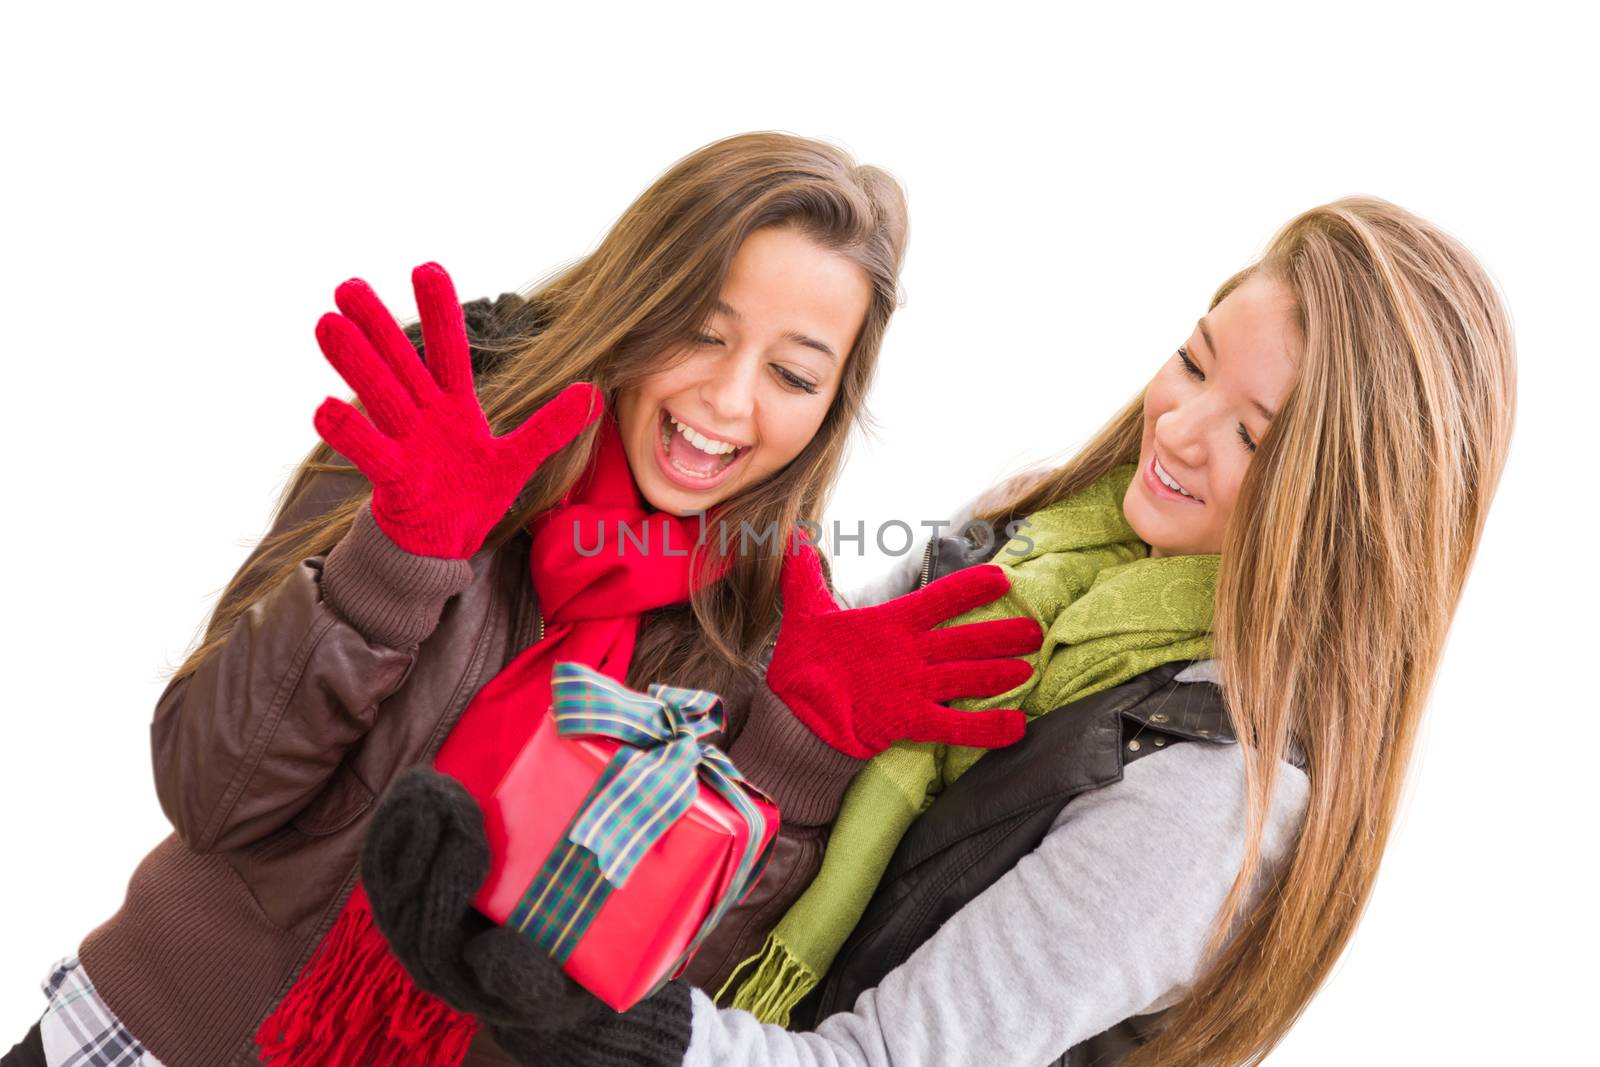 Mixed Race Young Adult Females Holding A Christmas Gift Isolated on a White Background. by Feverpitched